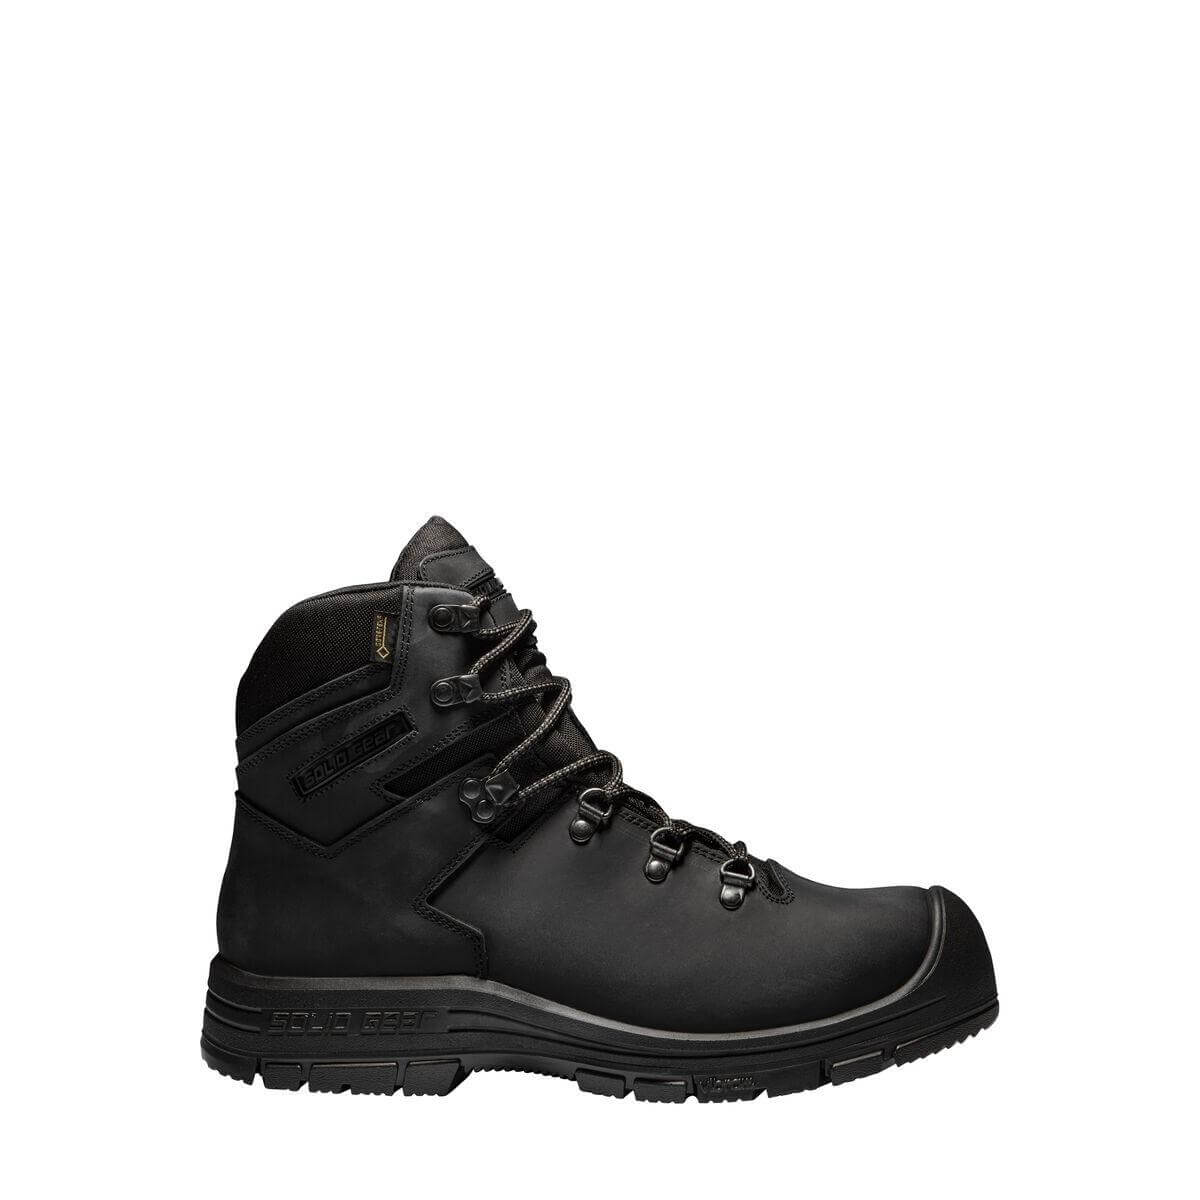 Solid Gear by Snickers 75002 Bravo GTX Gore Tex Wide Fit Waterproof Composite Toe S3 Safety Boots Black 01 #colour_black